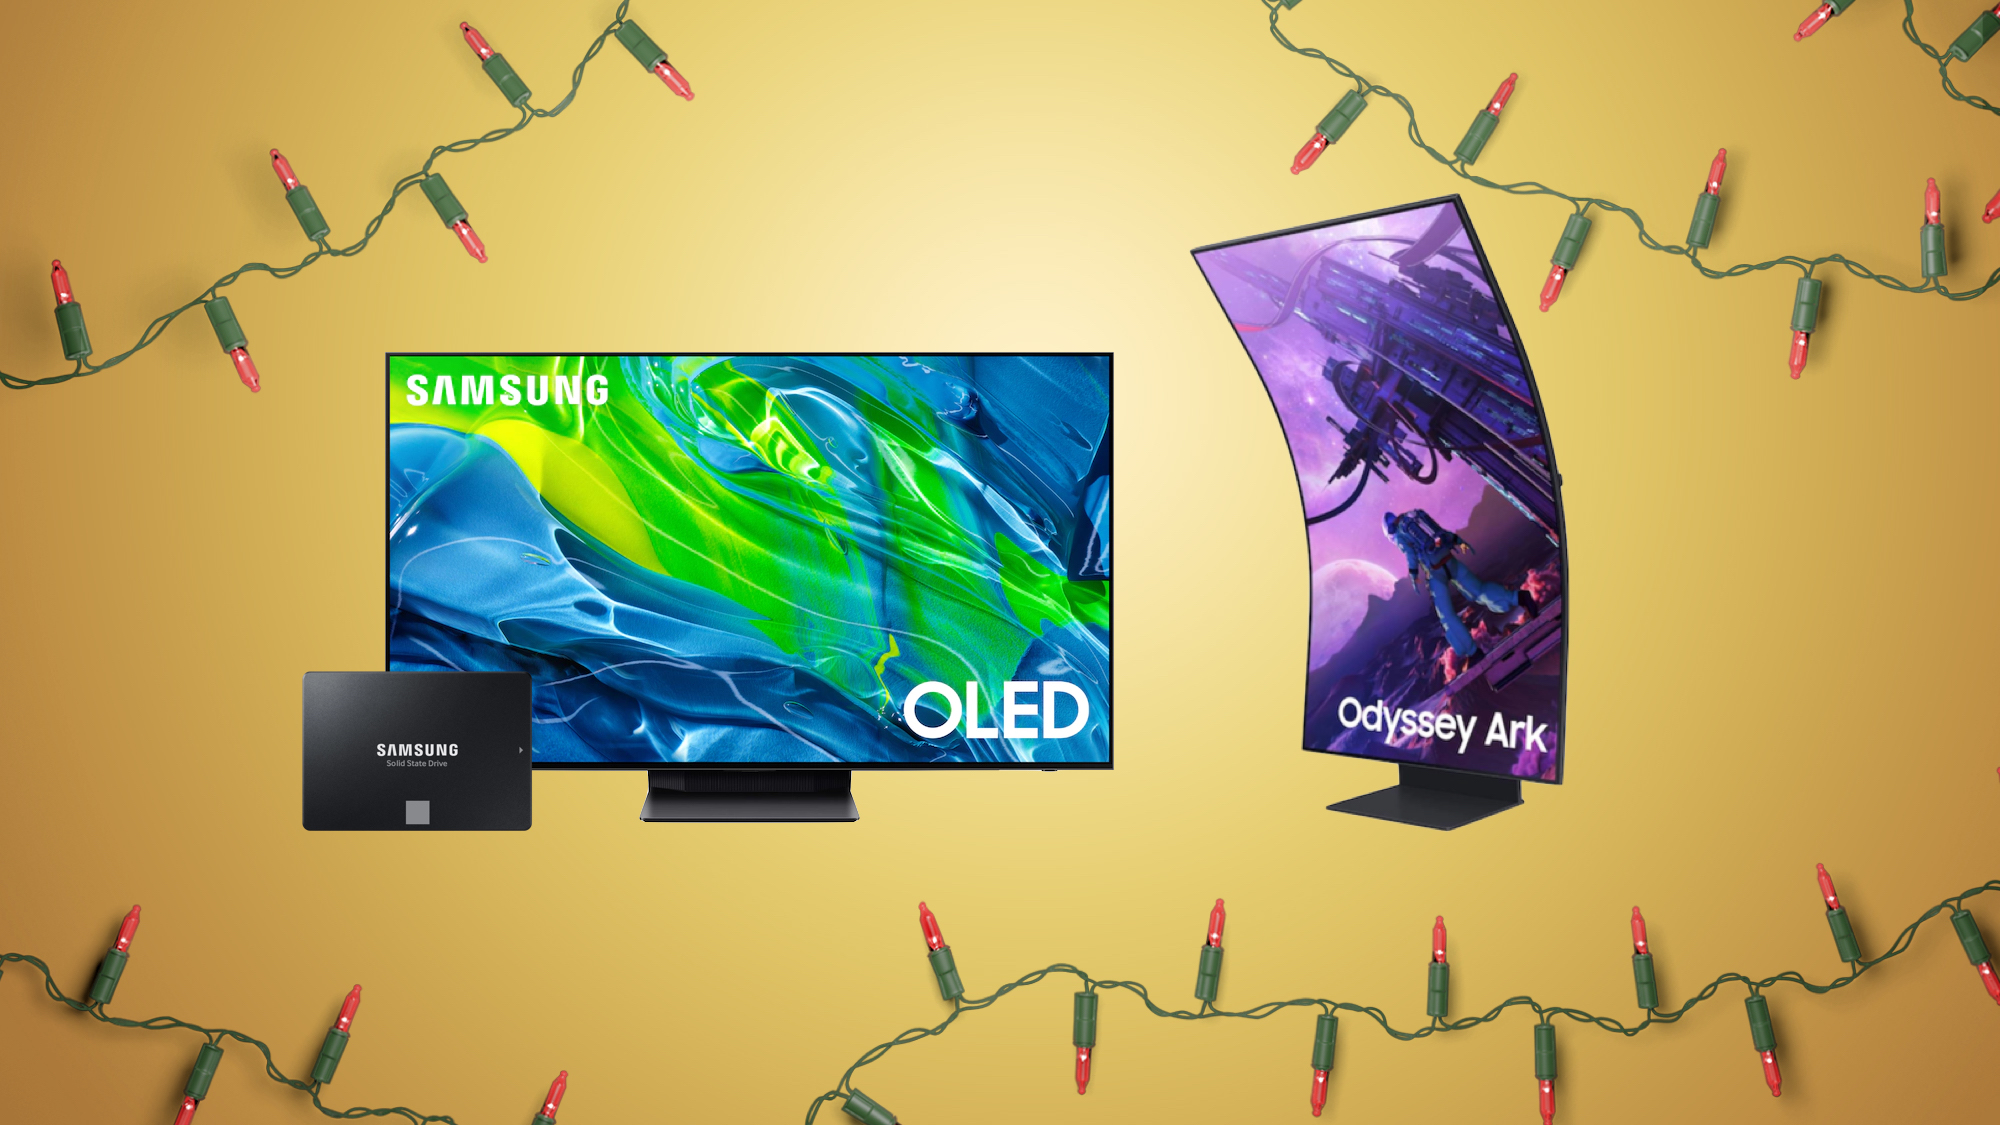 Deals: Samsung’s New Winter Sale Has Major Discounts on TVs, Monitors, and More